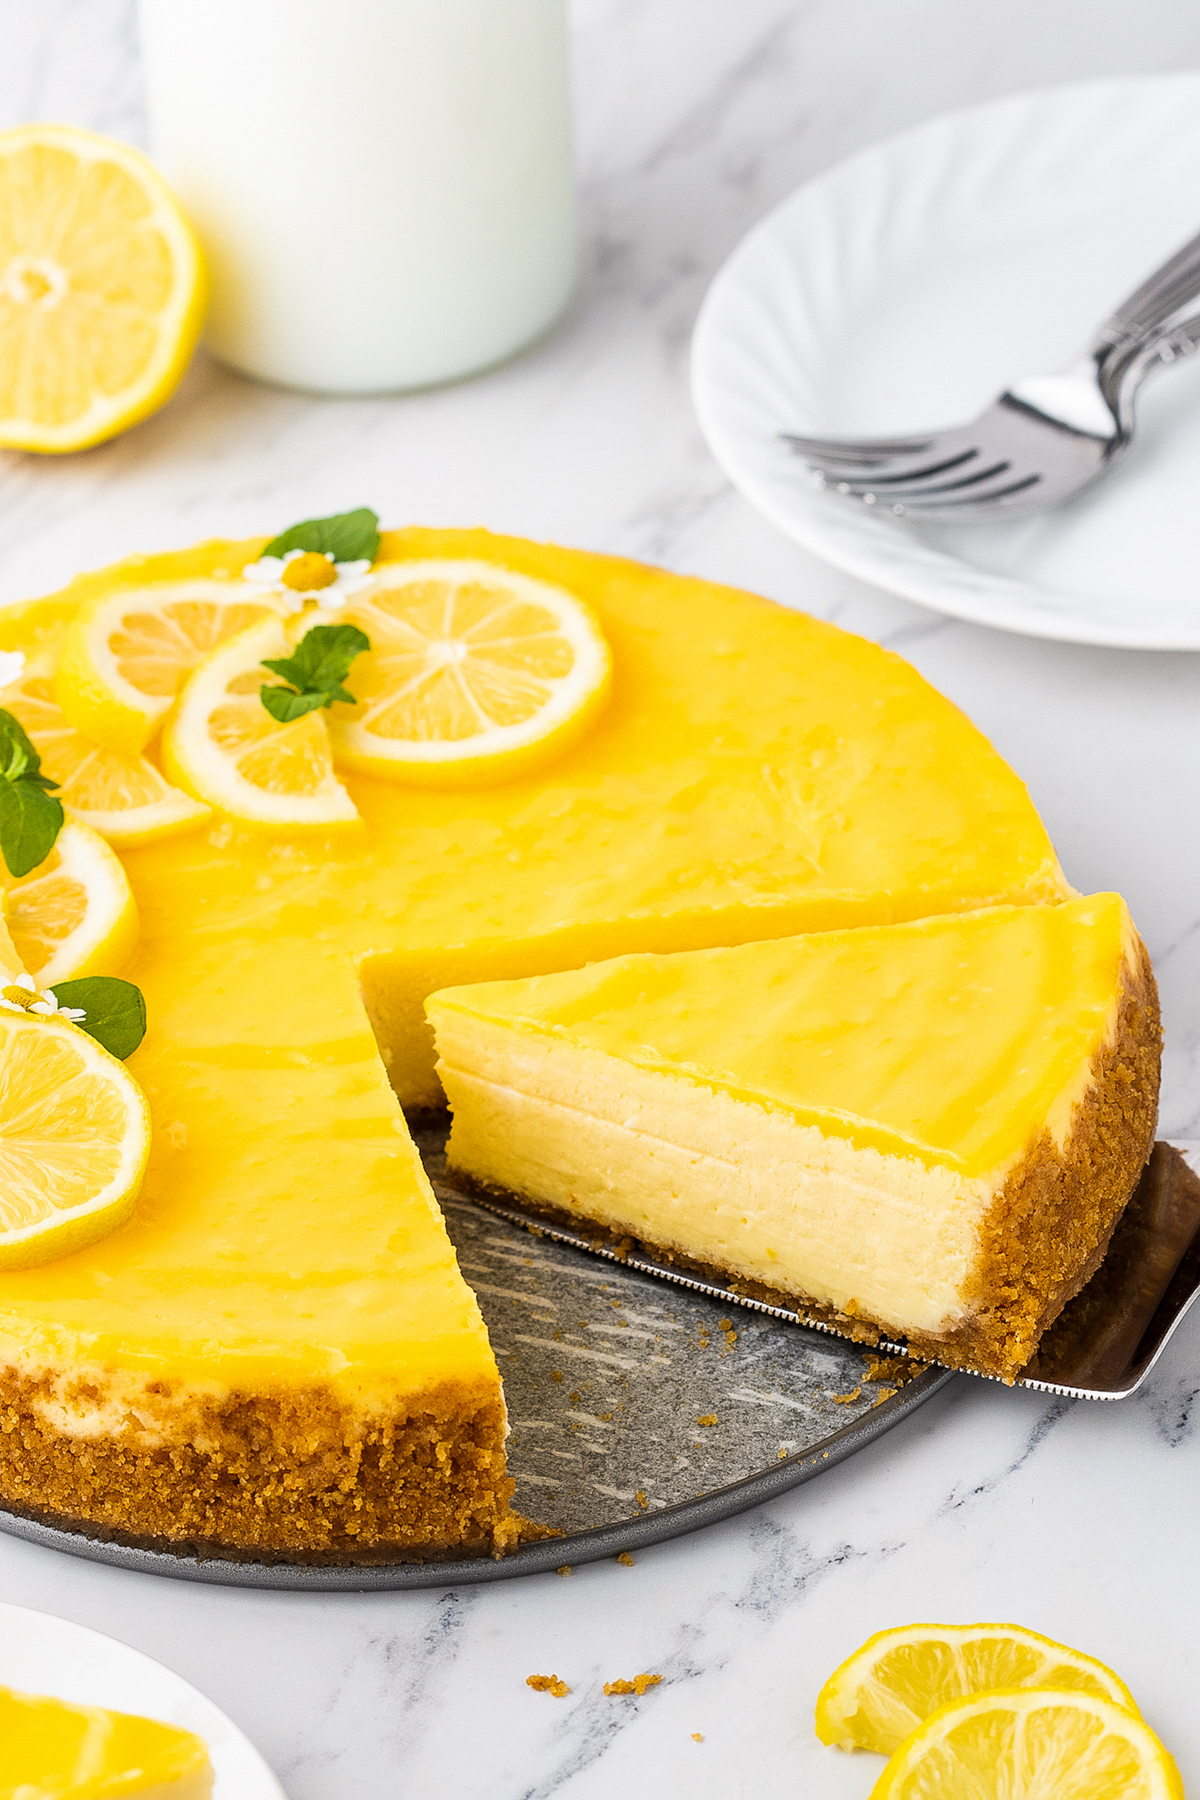 A slice of lemon cheesecake is being cut and removed from the whole cheesecake.